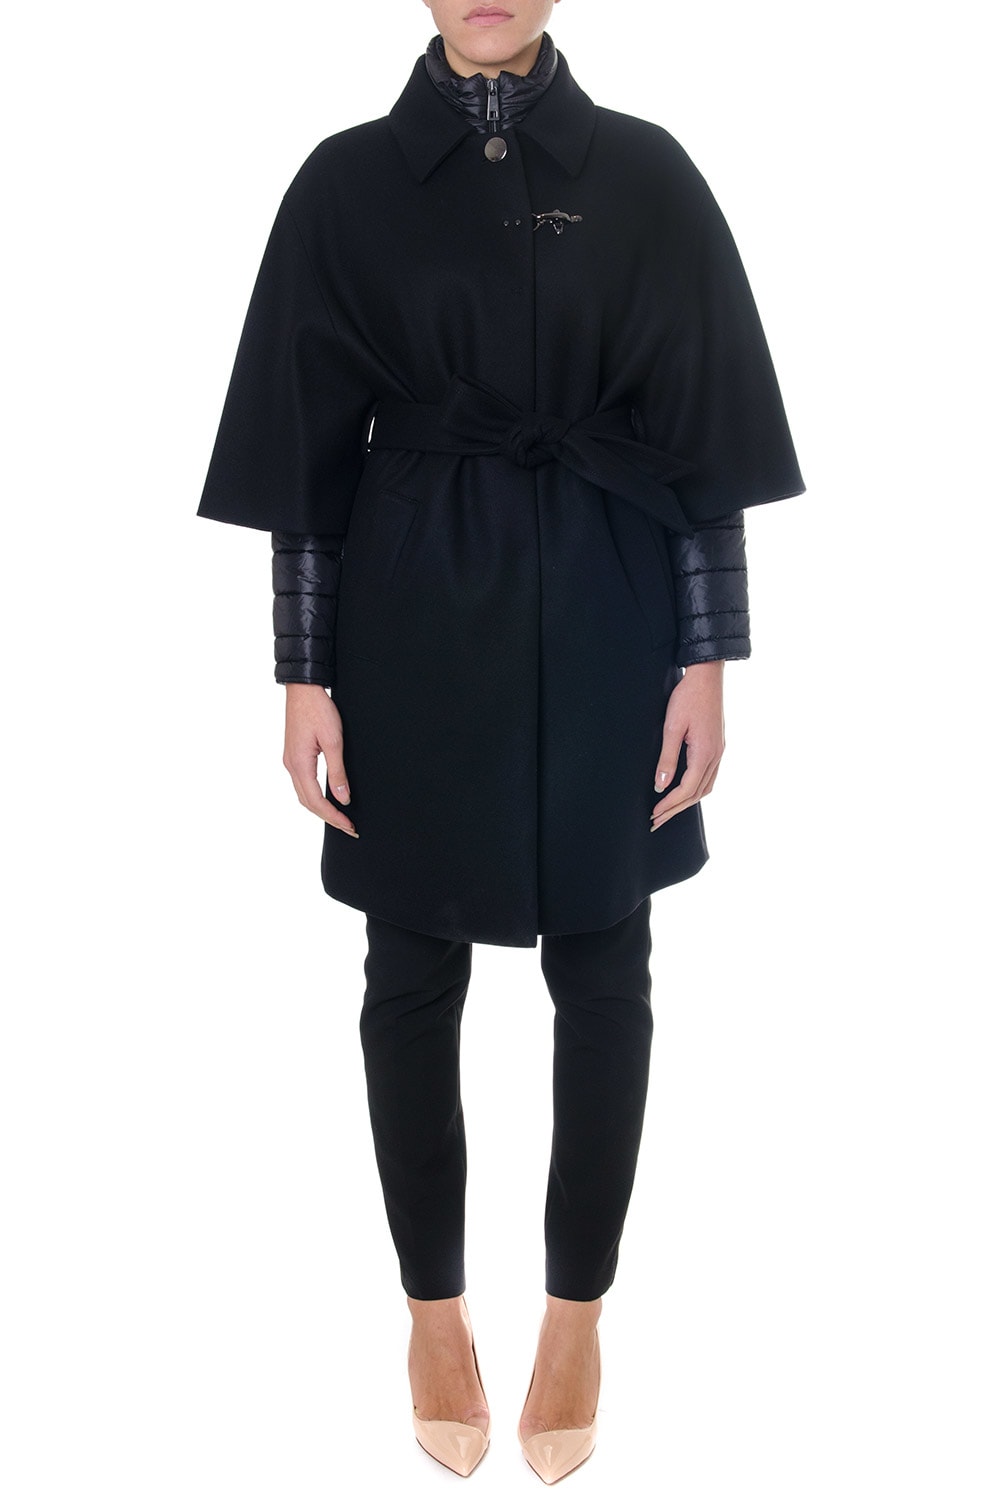 Fay Black Double Layer Cashmere Coat